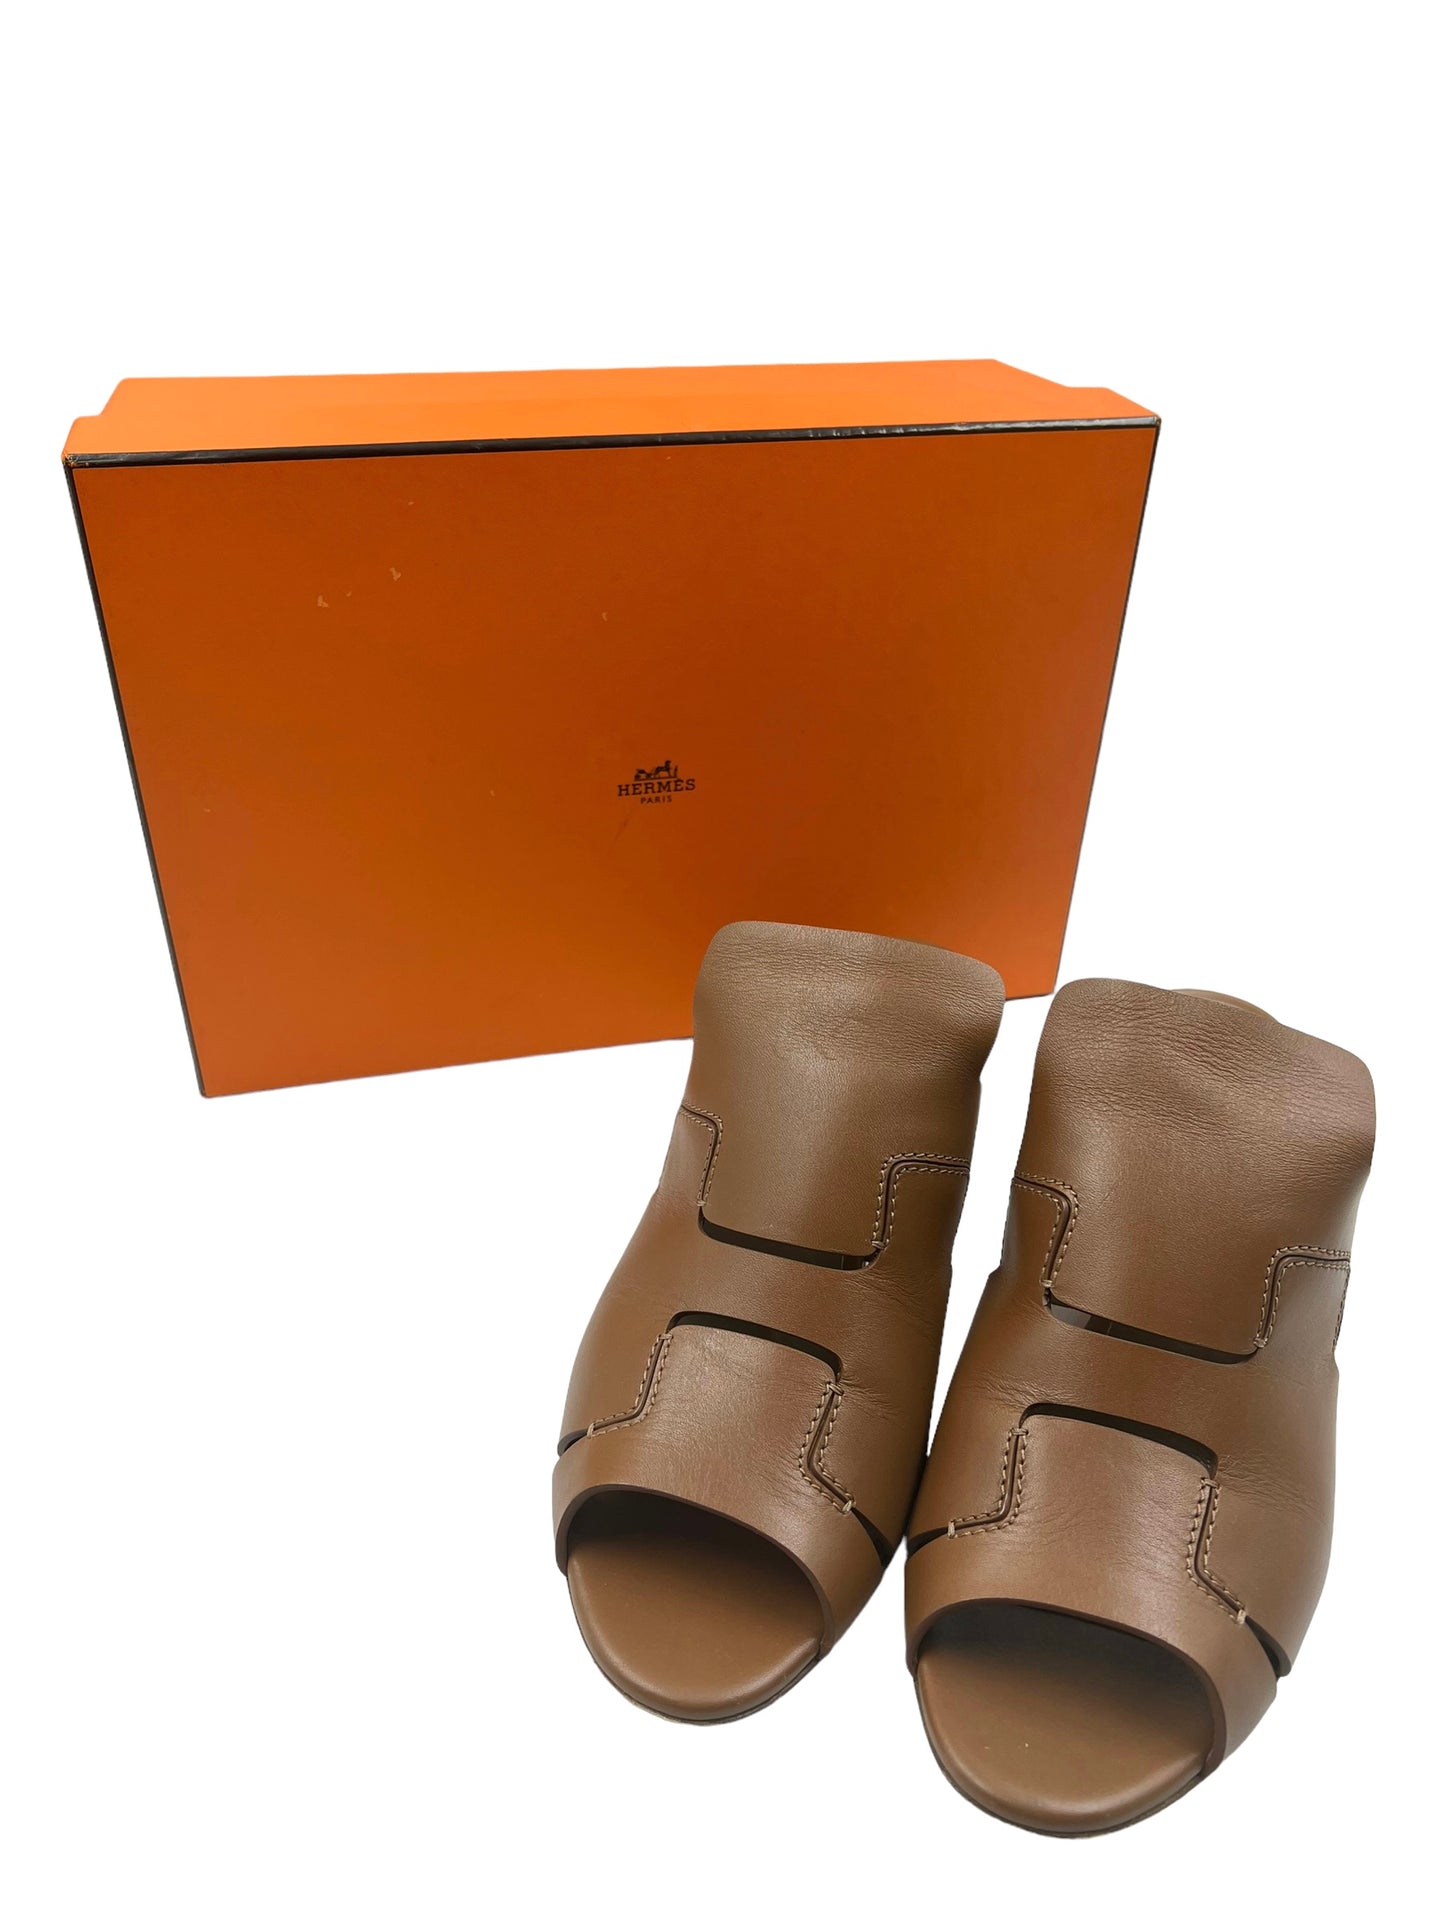 Hermes Tan Leather Size 39.5 'Right Mule' Sandals